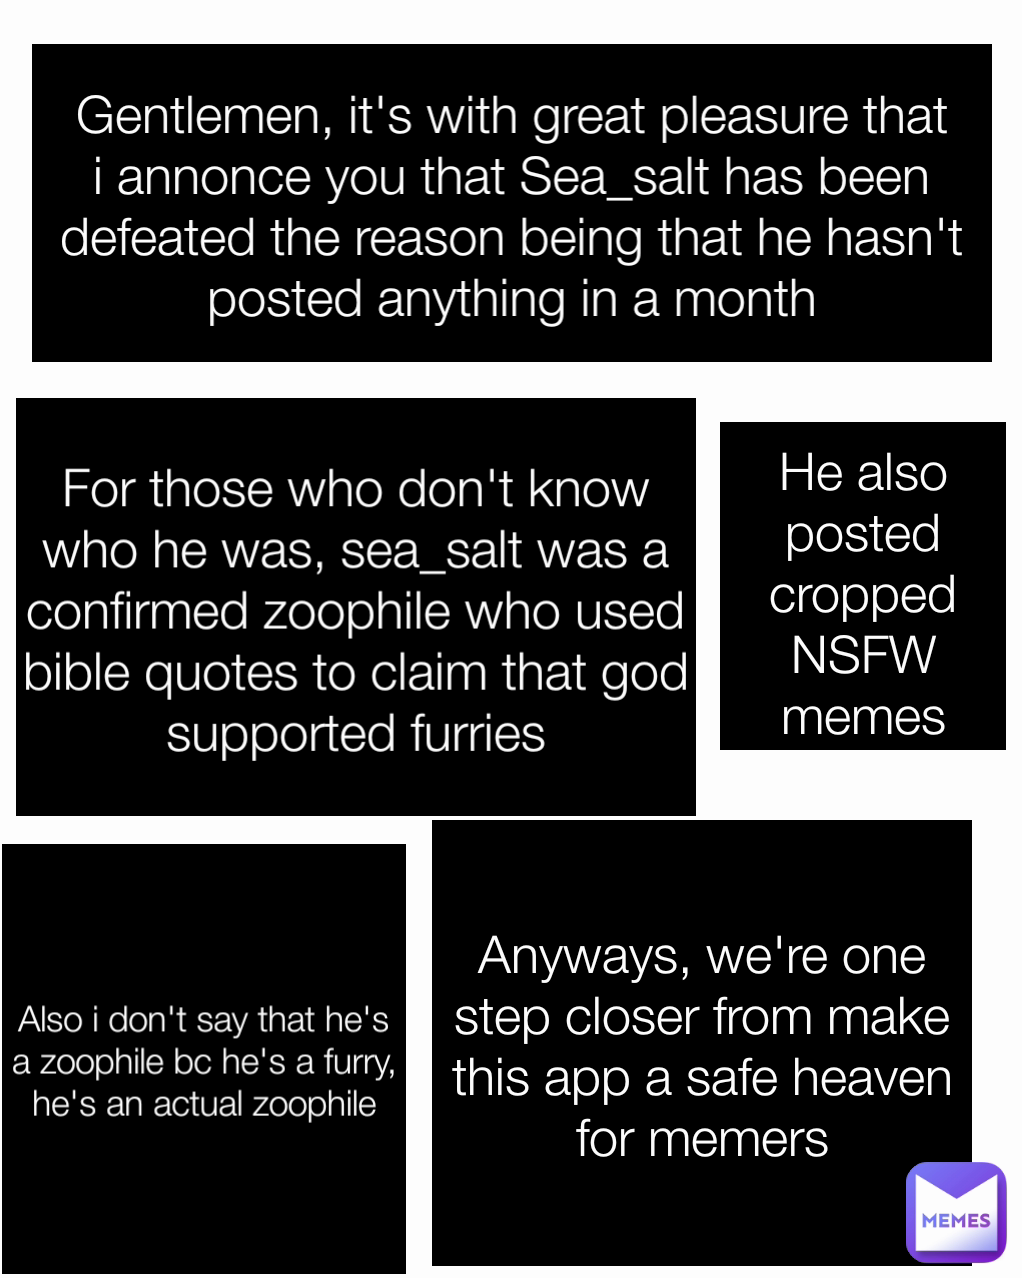 Anyways, we're one step closer from make this app a safe heaven for memers For those who don't know who he was, sea_salt was a confirmed zoophile who used bible quotes to claim that god supported furries He also posted cropped NSFW memes Also i don't say that he's a zoophile bc he's a furry, he's an actual zoophile Gentlemen, it's with great pleasure that i annonce you that Sea_salt has been defeated the reason being that he hasn't posted anything in a month